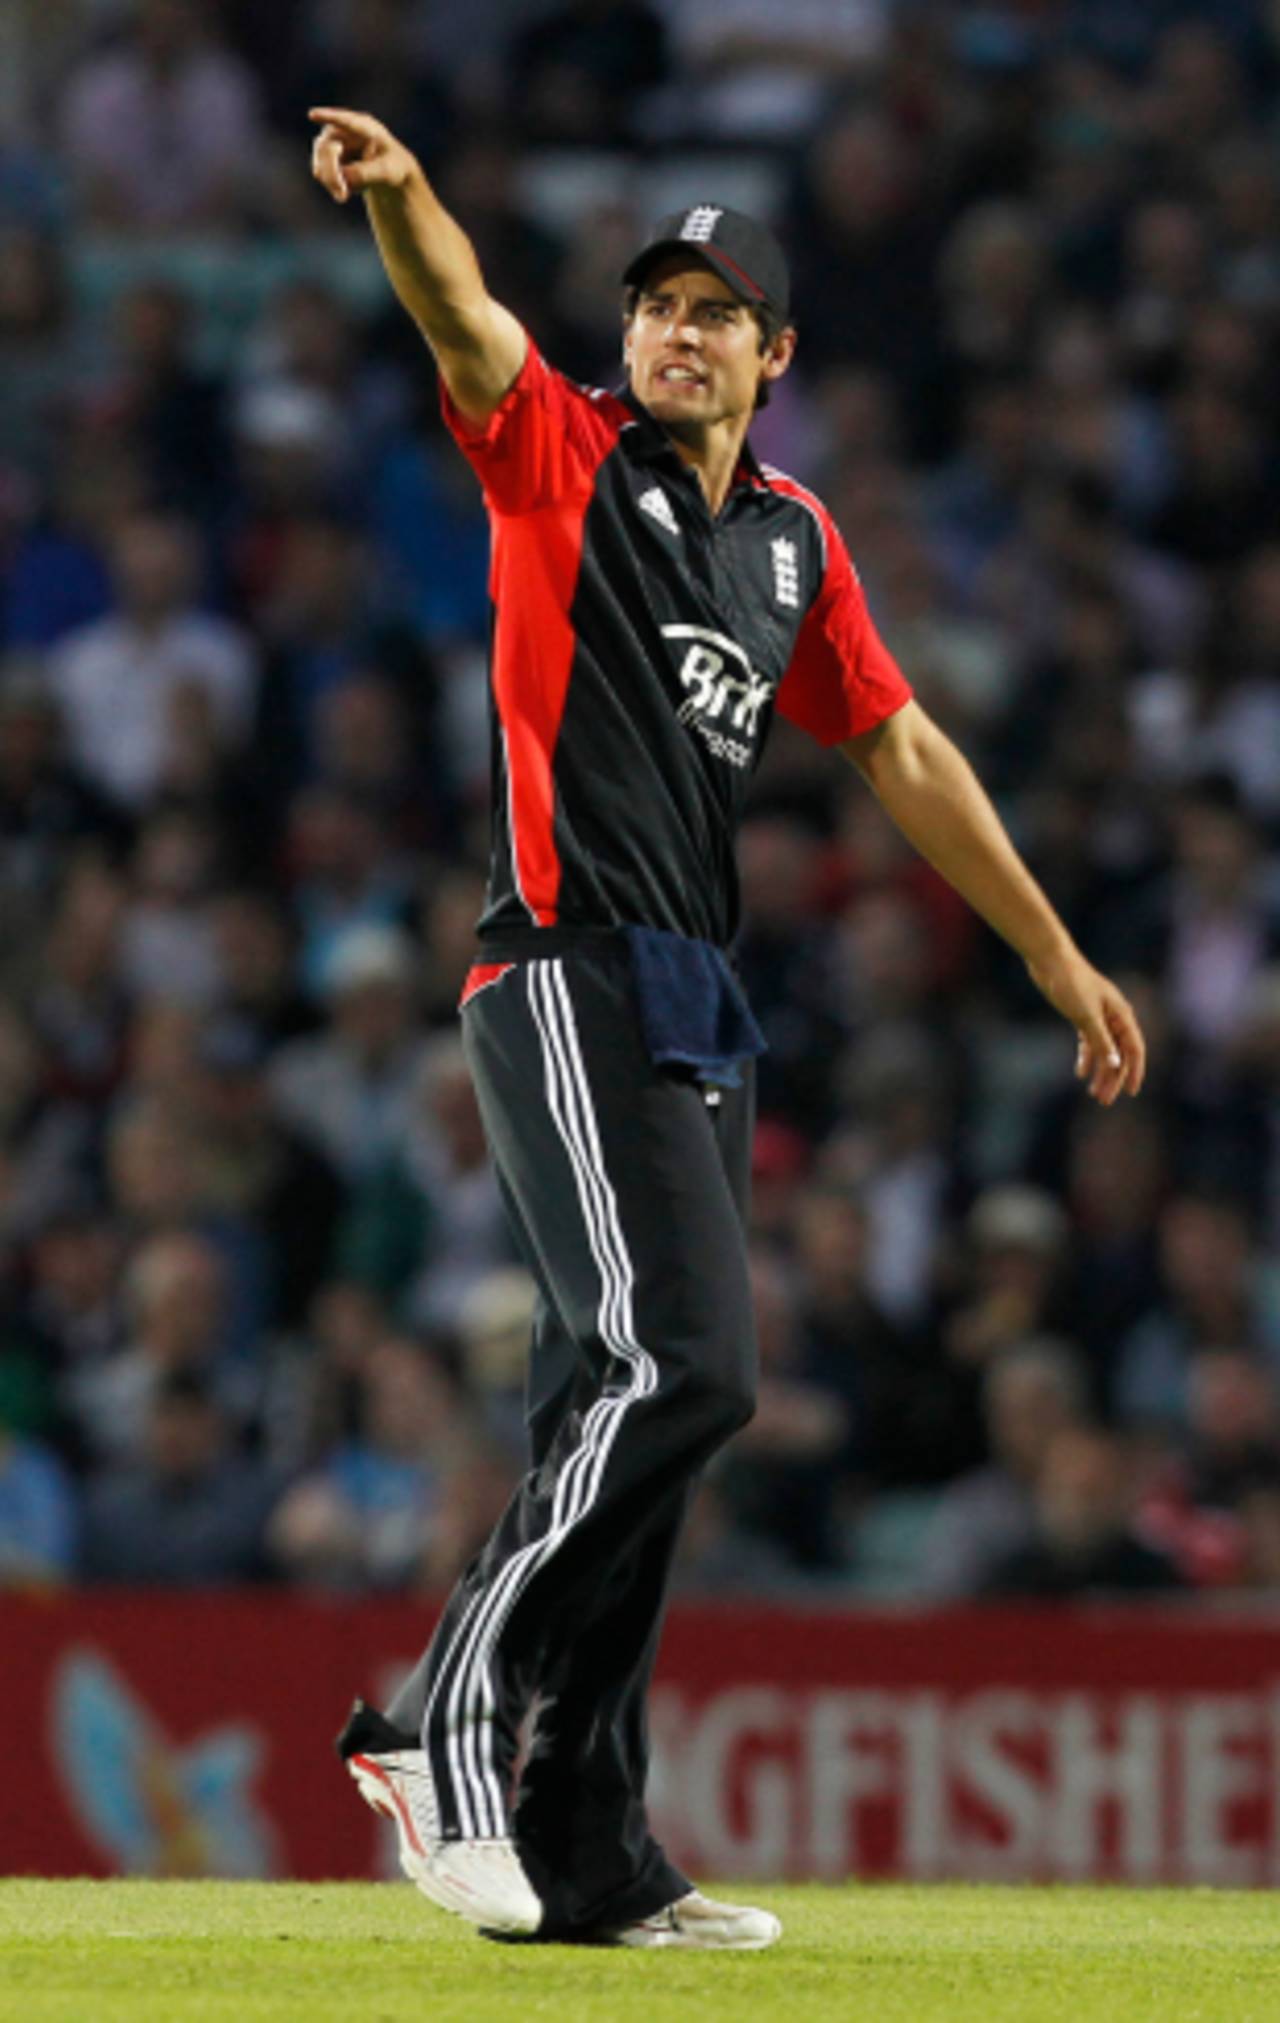 Alastair Cook issues directions in the field, England v Sri Lanka, 1st ODI, The Oval, June 28 2011